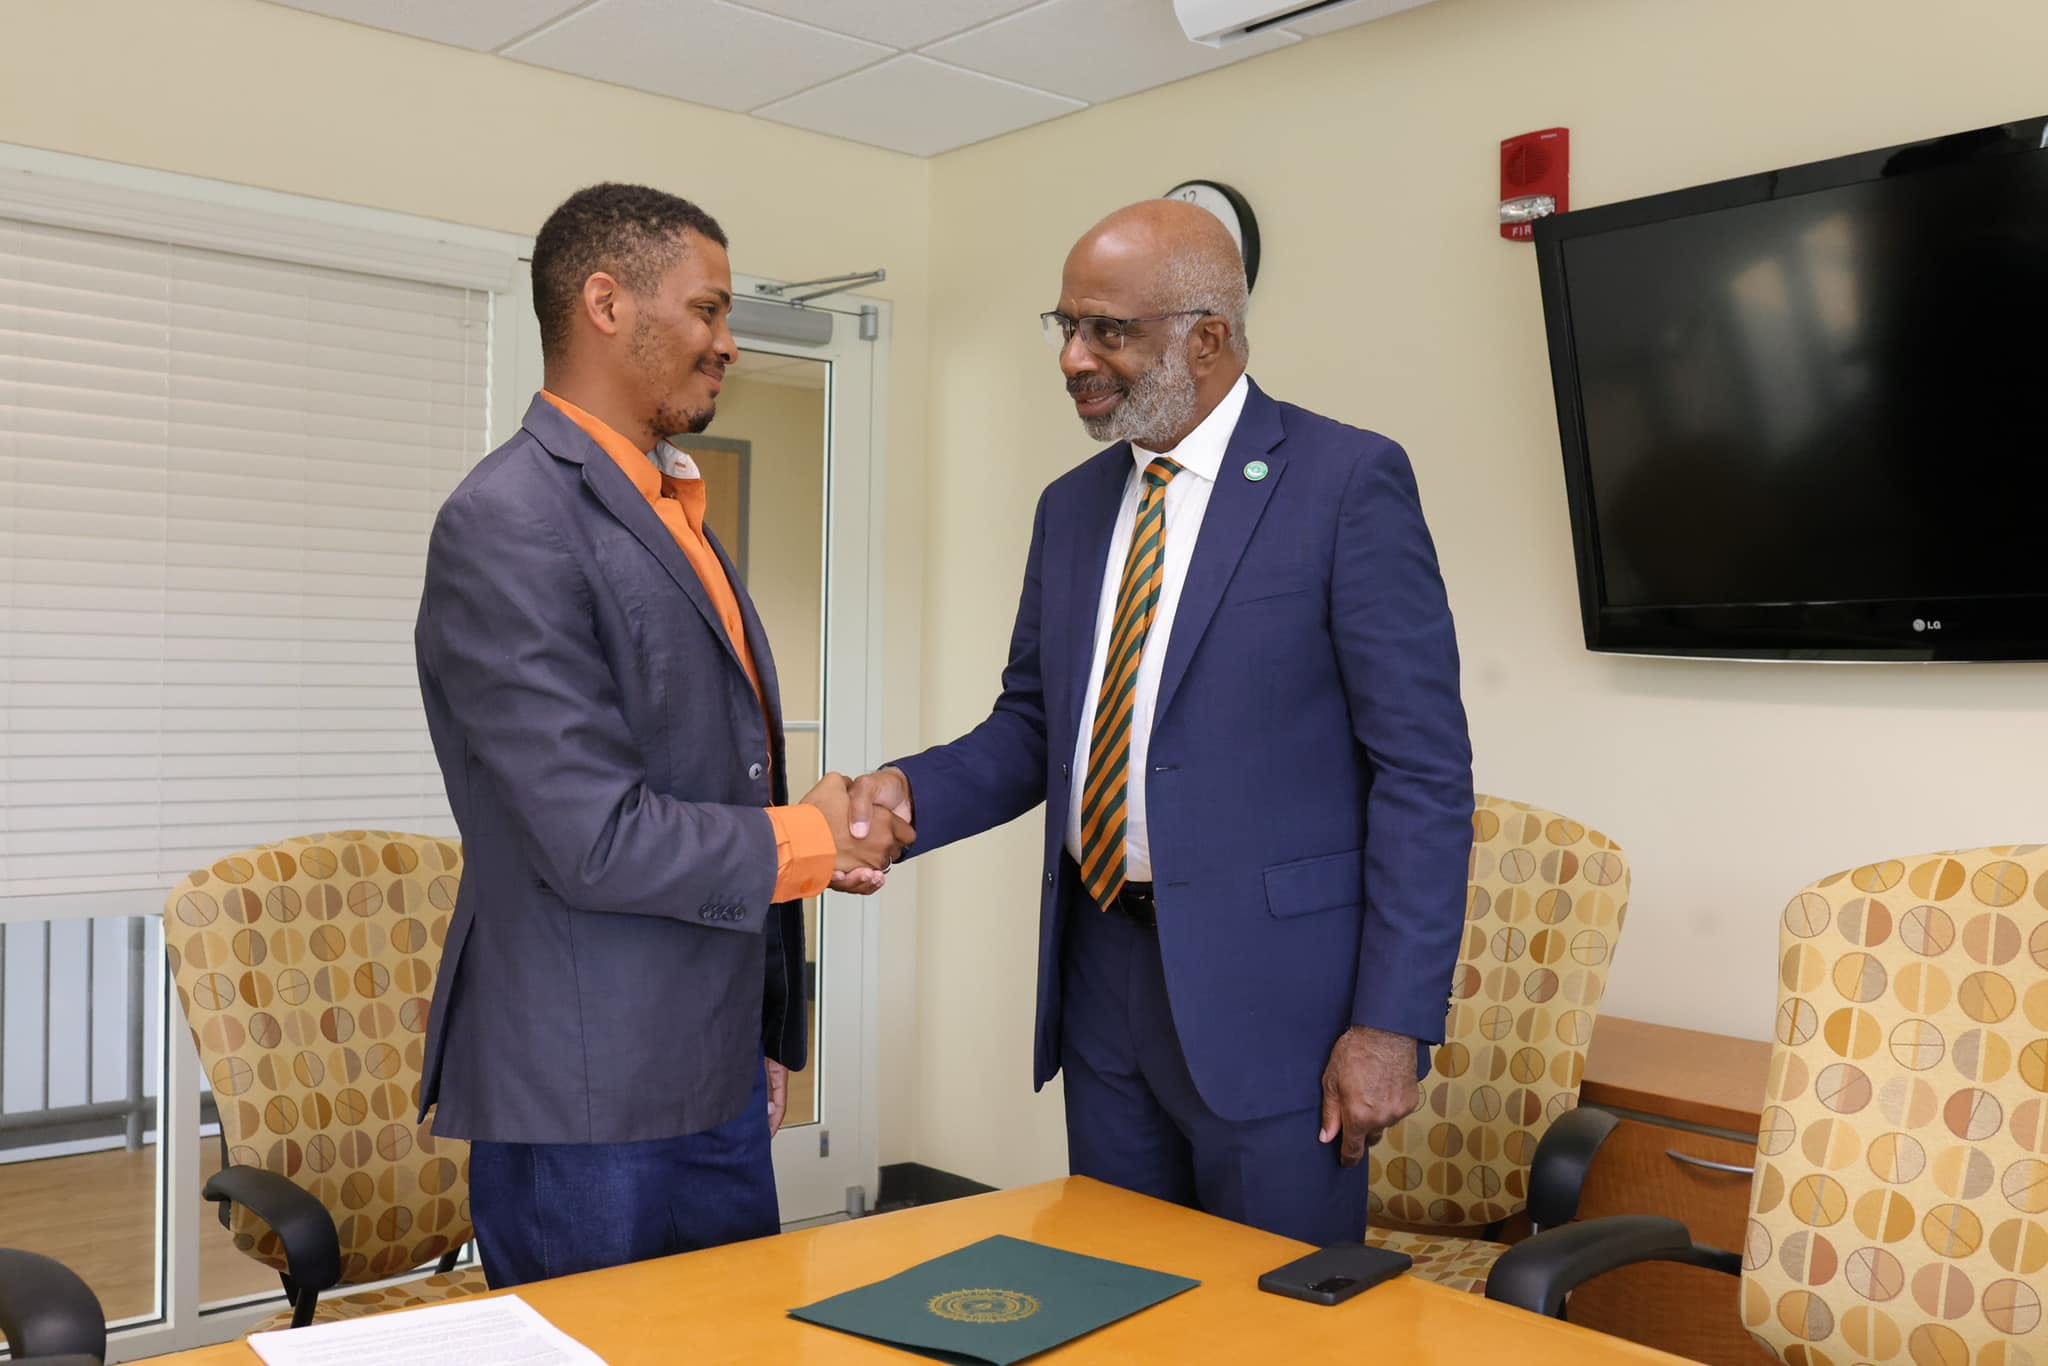 FAMU President says donor gift on hold amid crisis of confidence